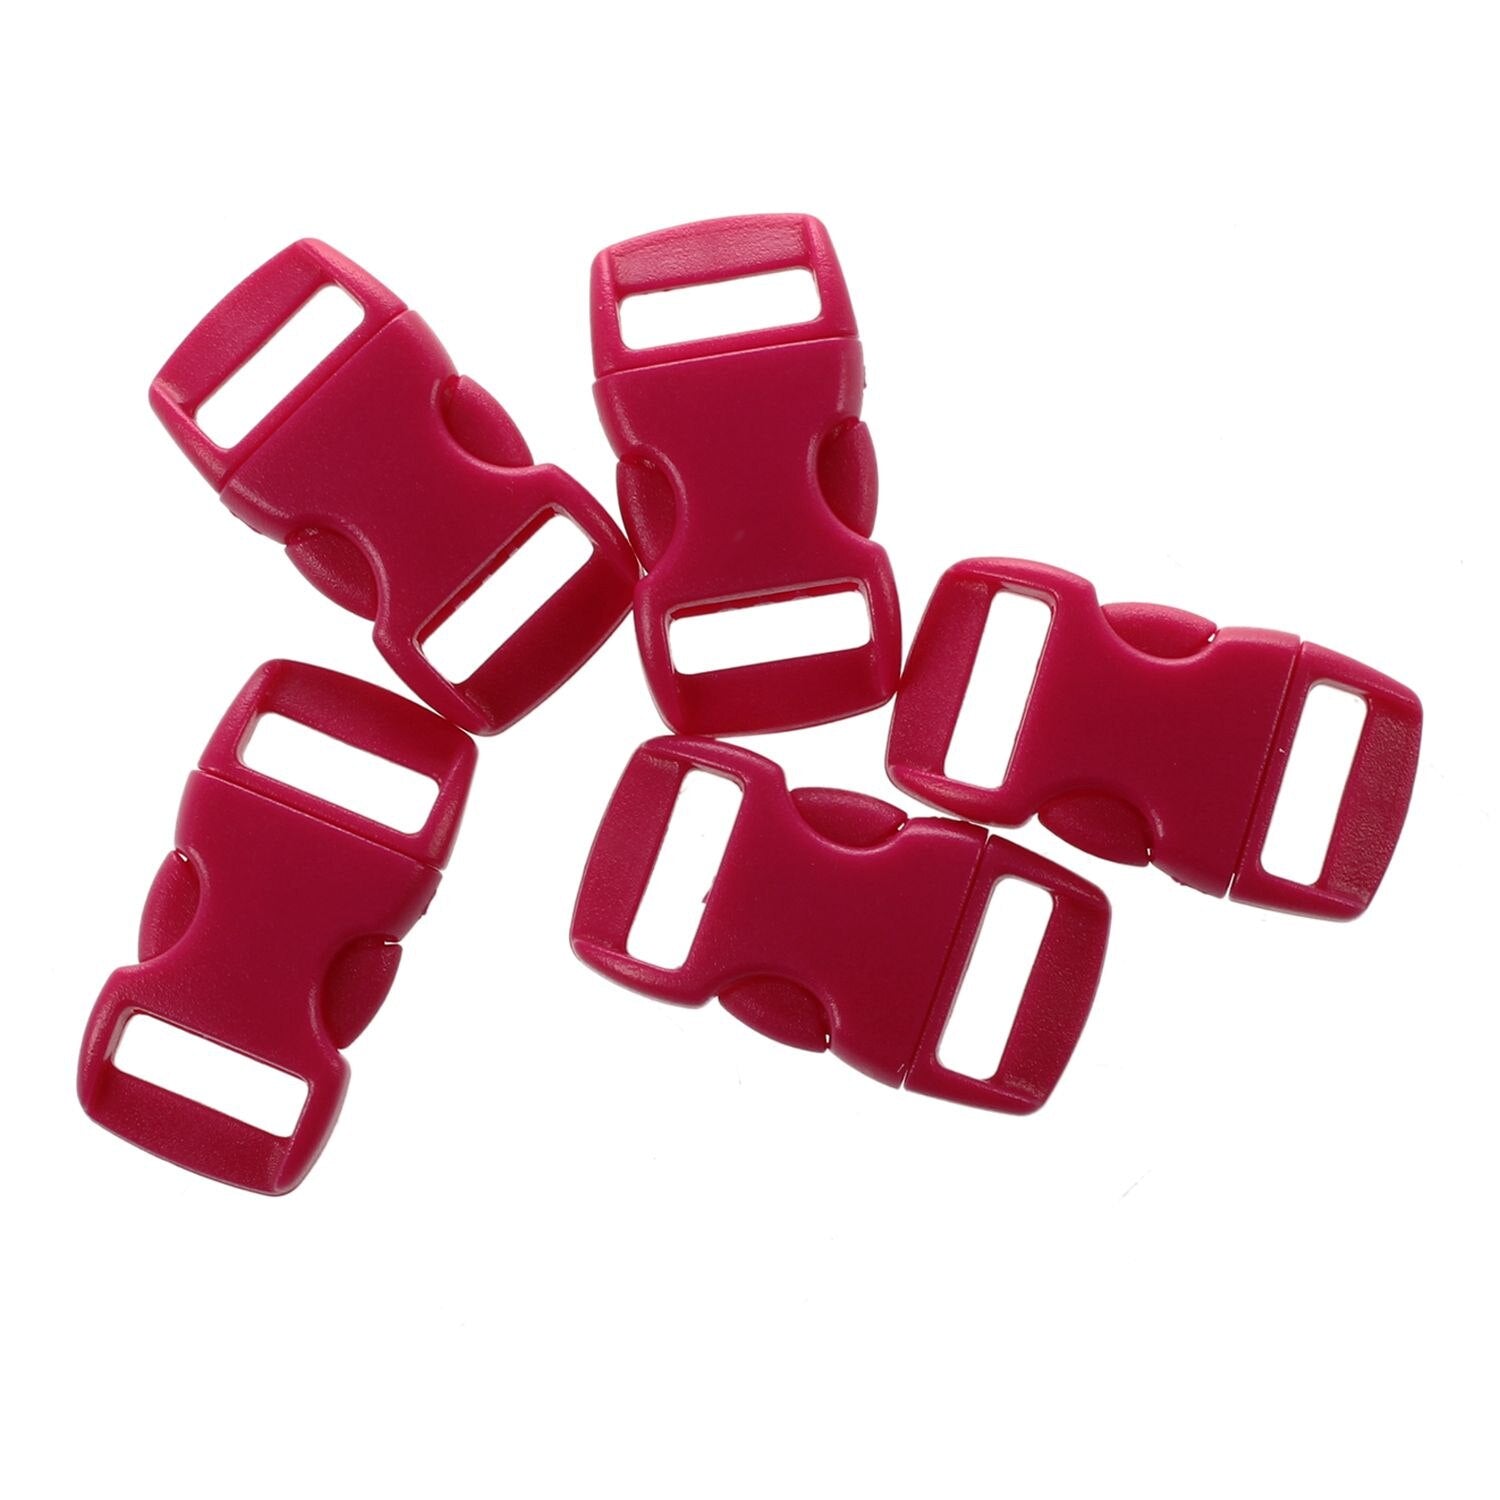 New 5 pieces 11mm Wide Plastic Release Side Buckle for Luggage Boxes Backpack Strap 29 x 15 x 6mm / 1.14 inchx 0.6inch x 0.24 - ebowsos